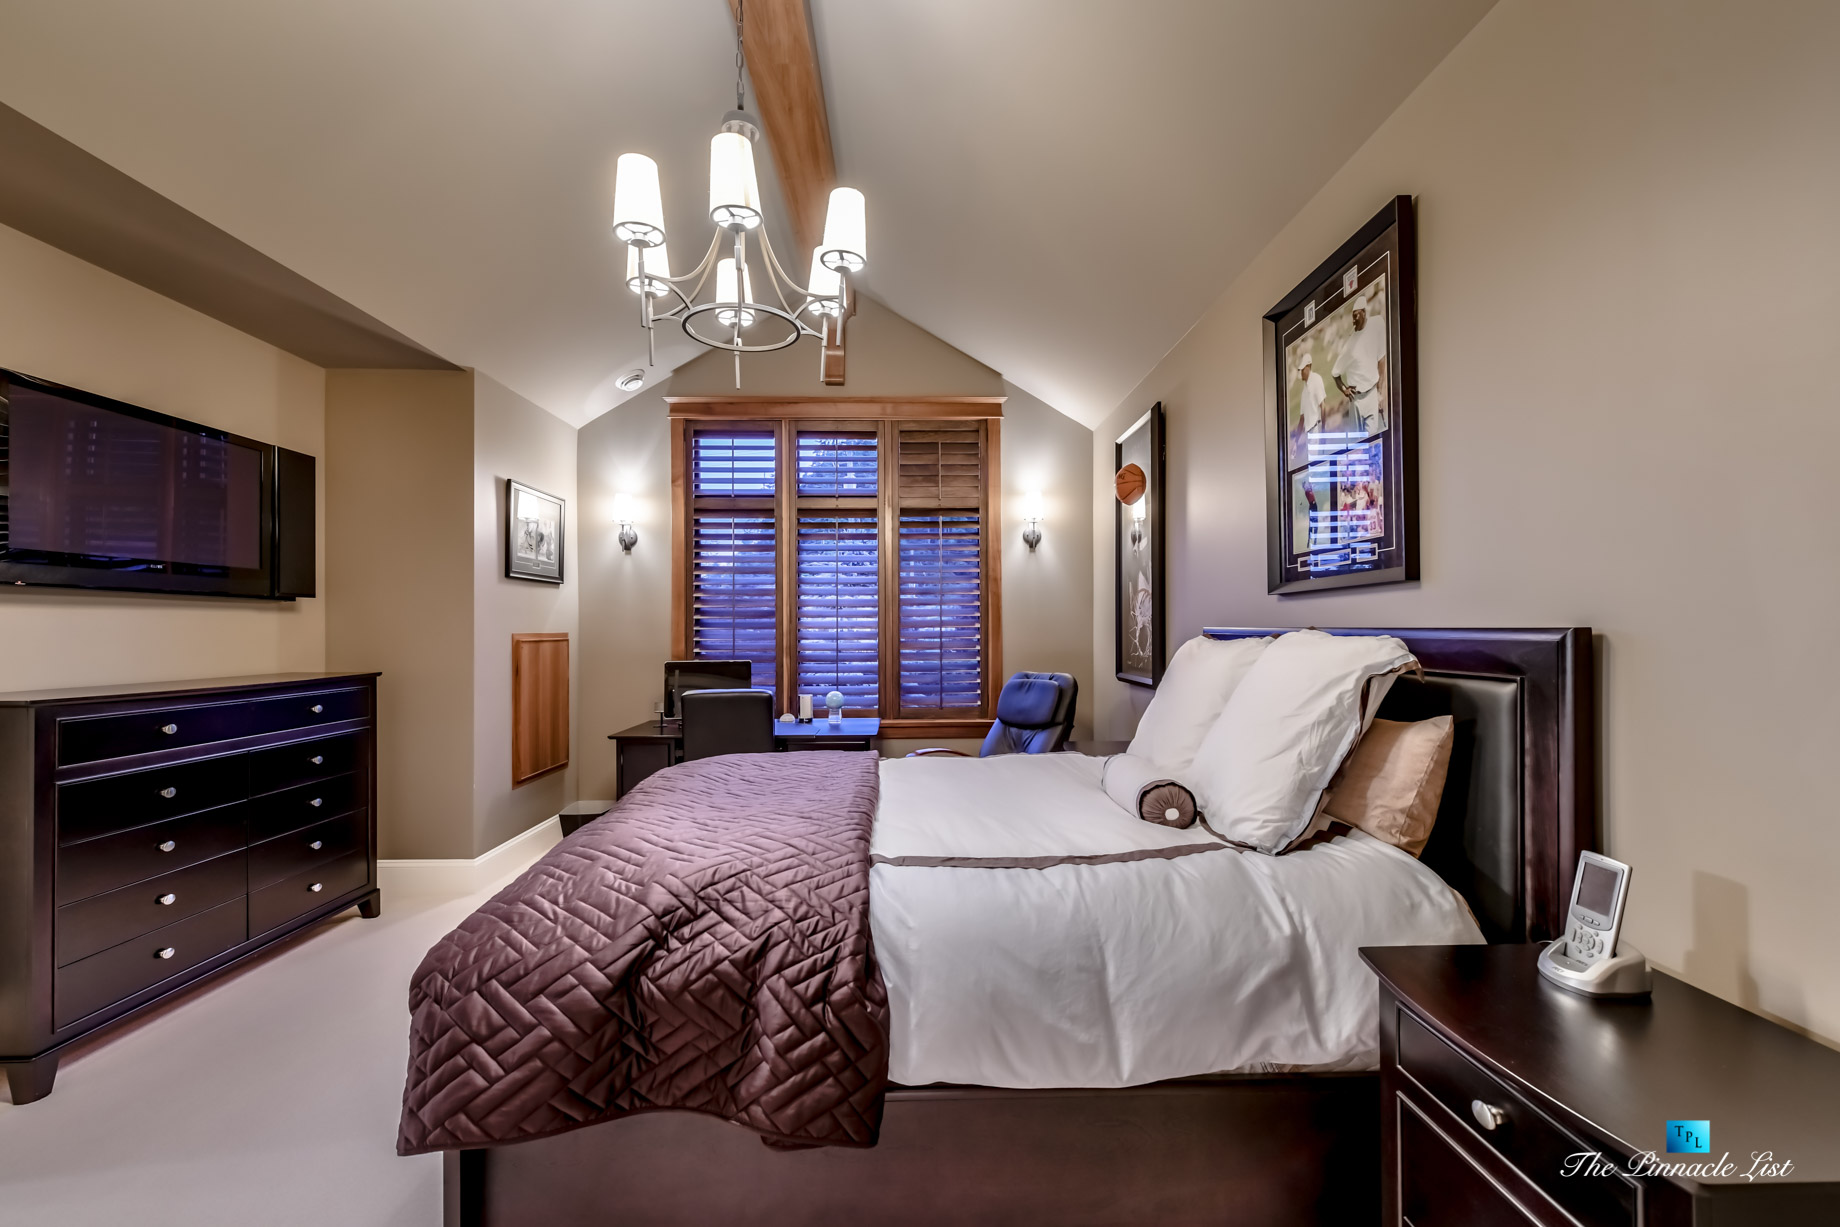 3053 Anmore Creek Way, Anmore, BC, Canada - Bedroom - Luxury Real Estate - Greater Vancouver Home